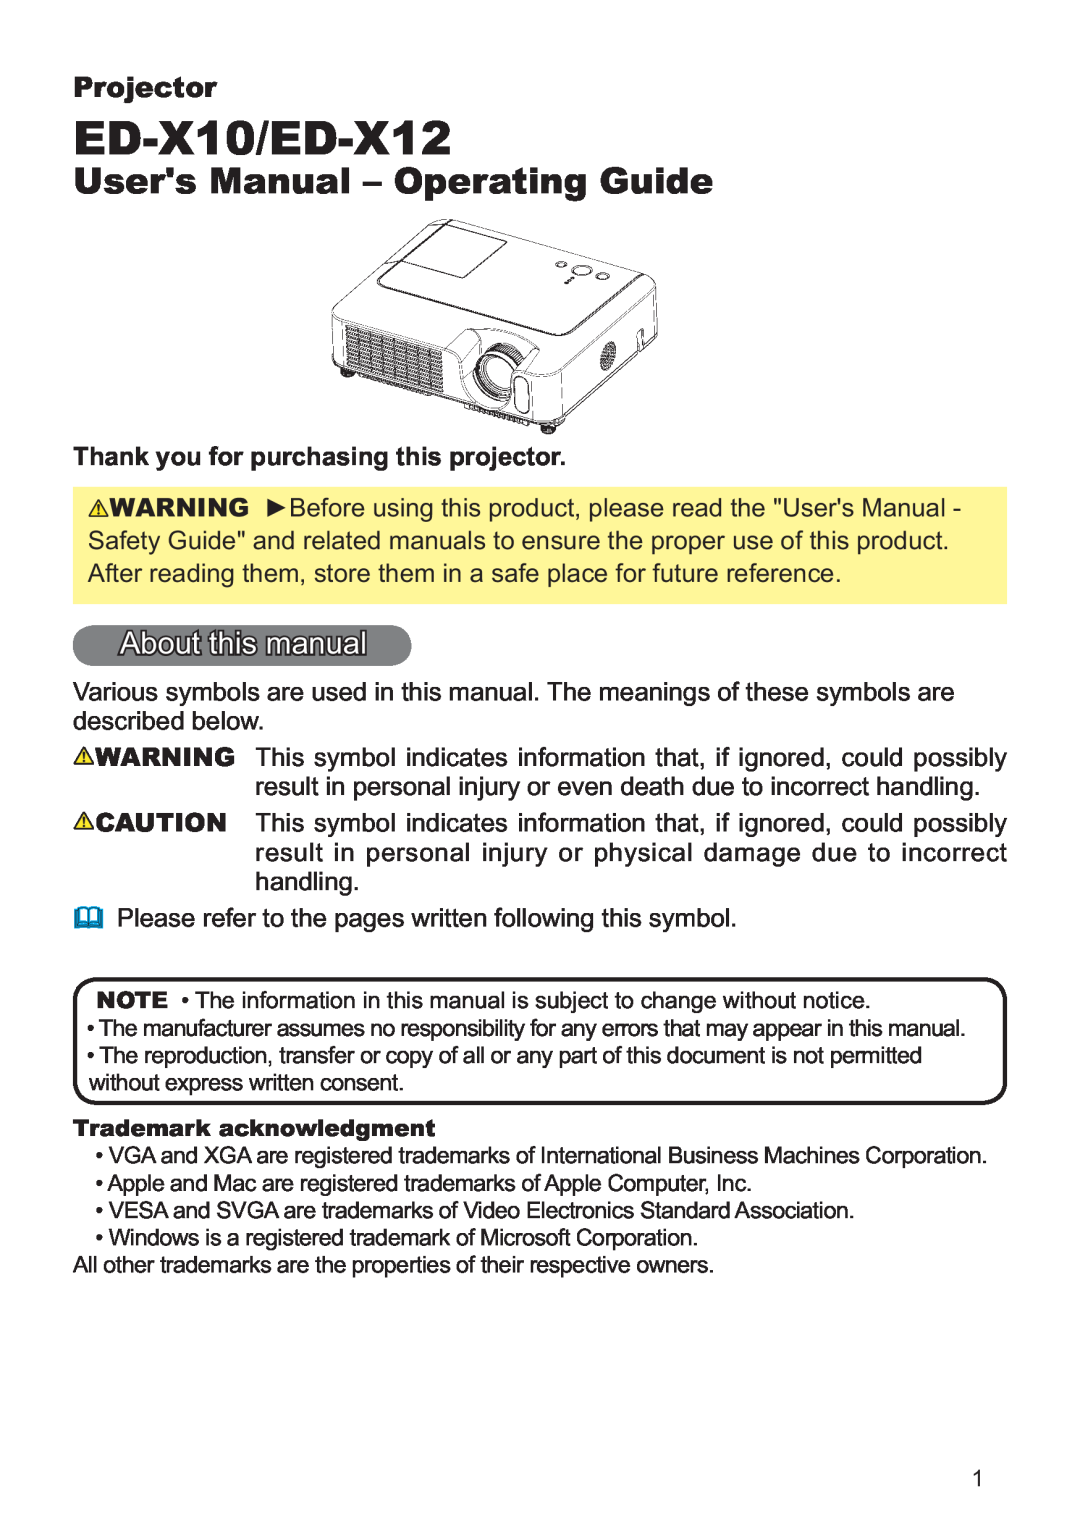 Hitachi user manual ED-X10/ED-X12, Users Manual – Operating Guide, About this manual, Projector 